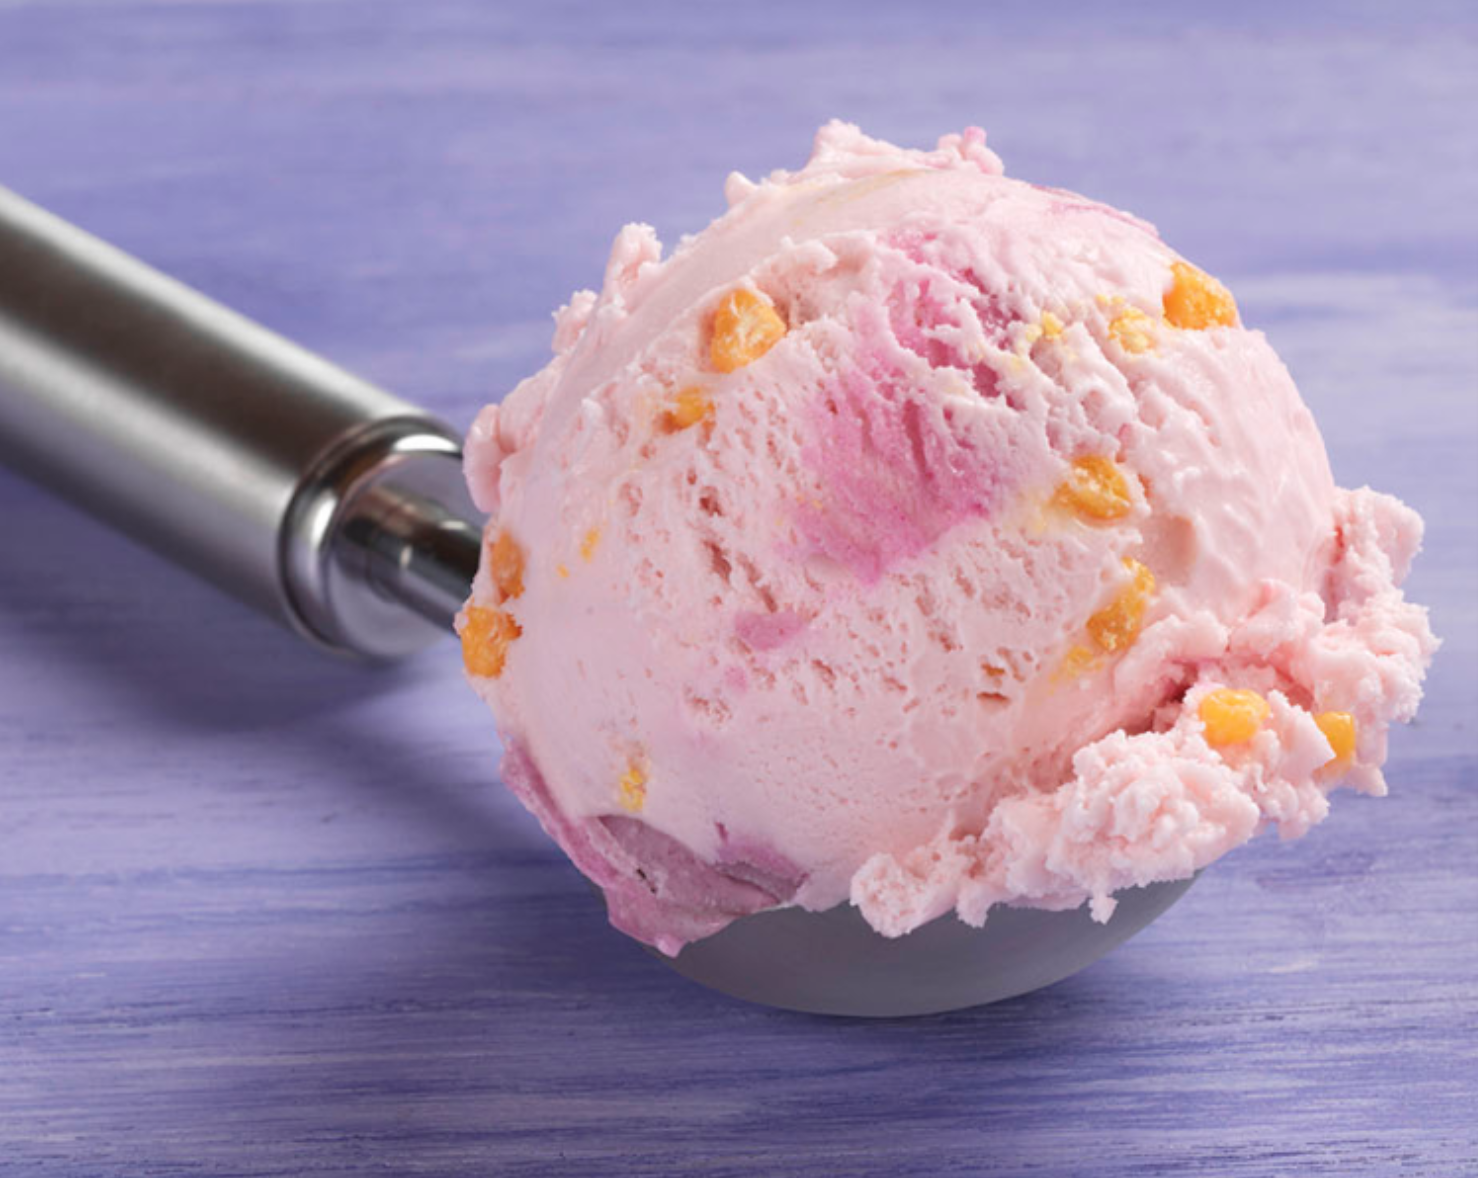 Baskin Robbins Has A C Otton Candy Crackle Flavor And It S A Carnival Of Color